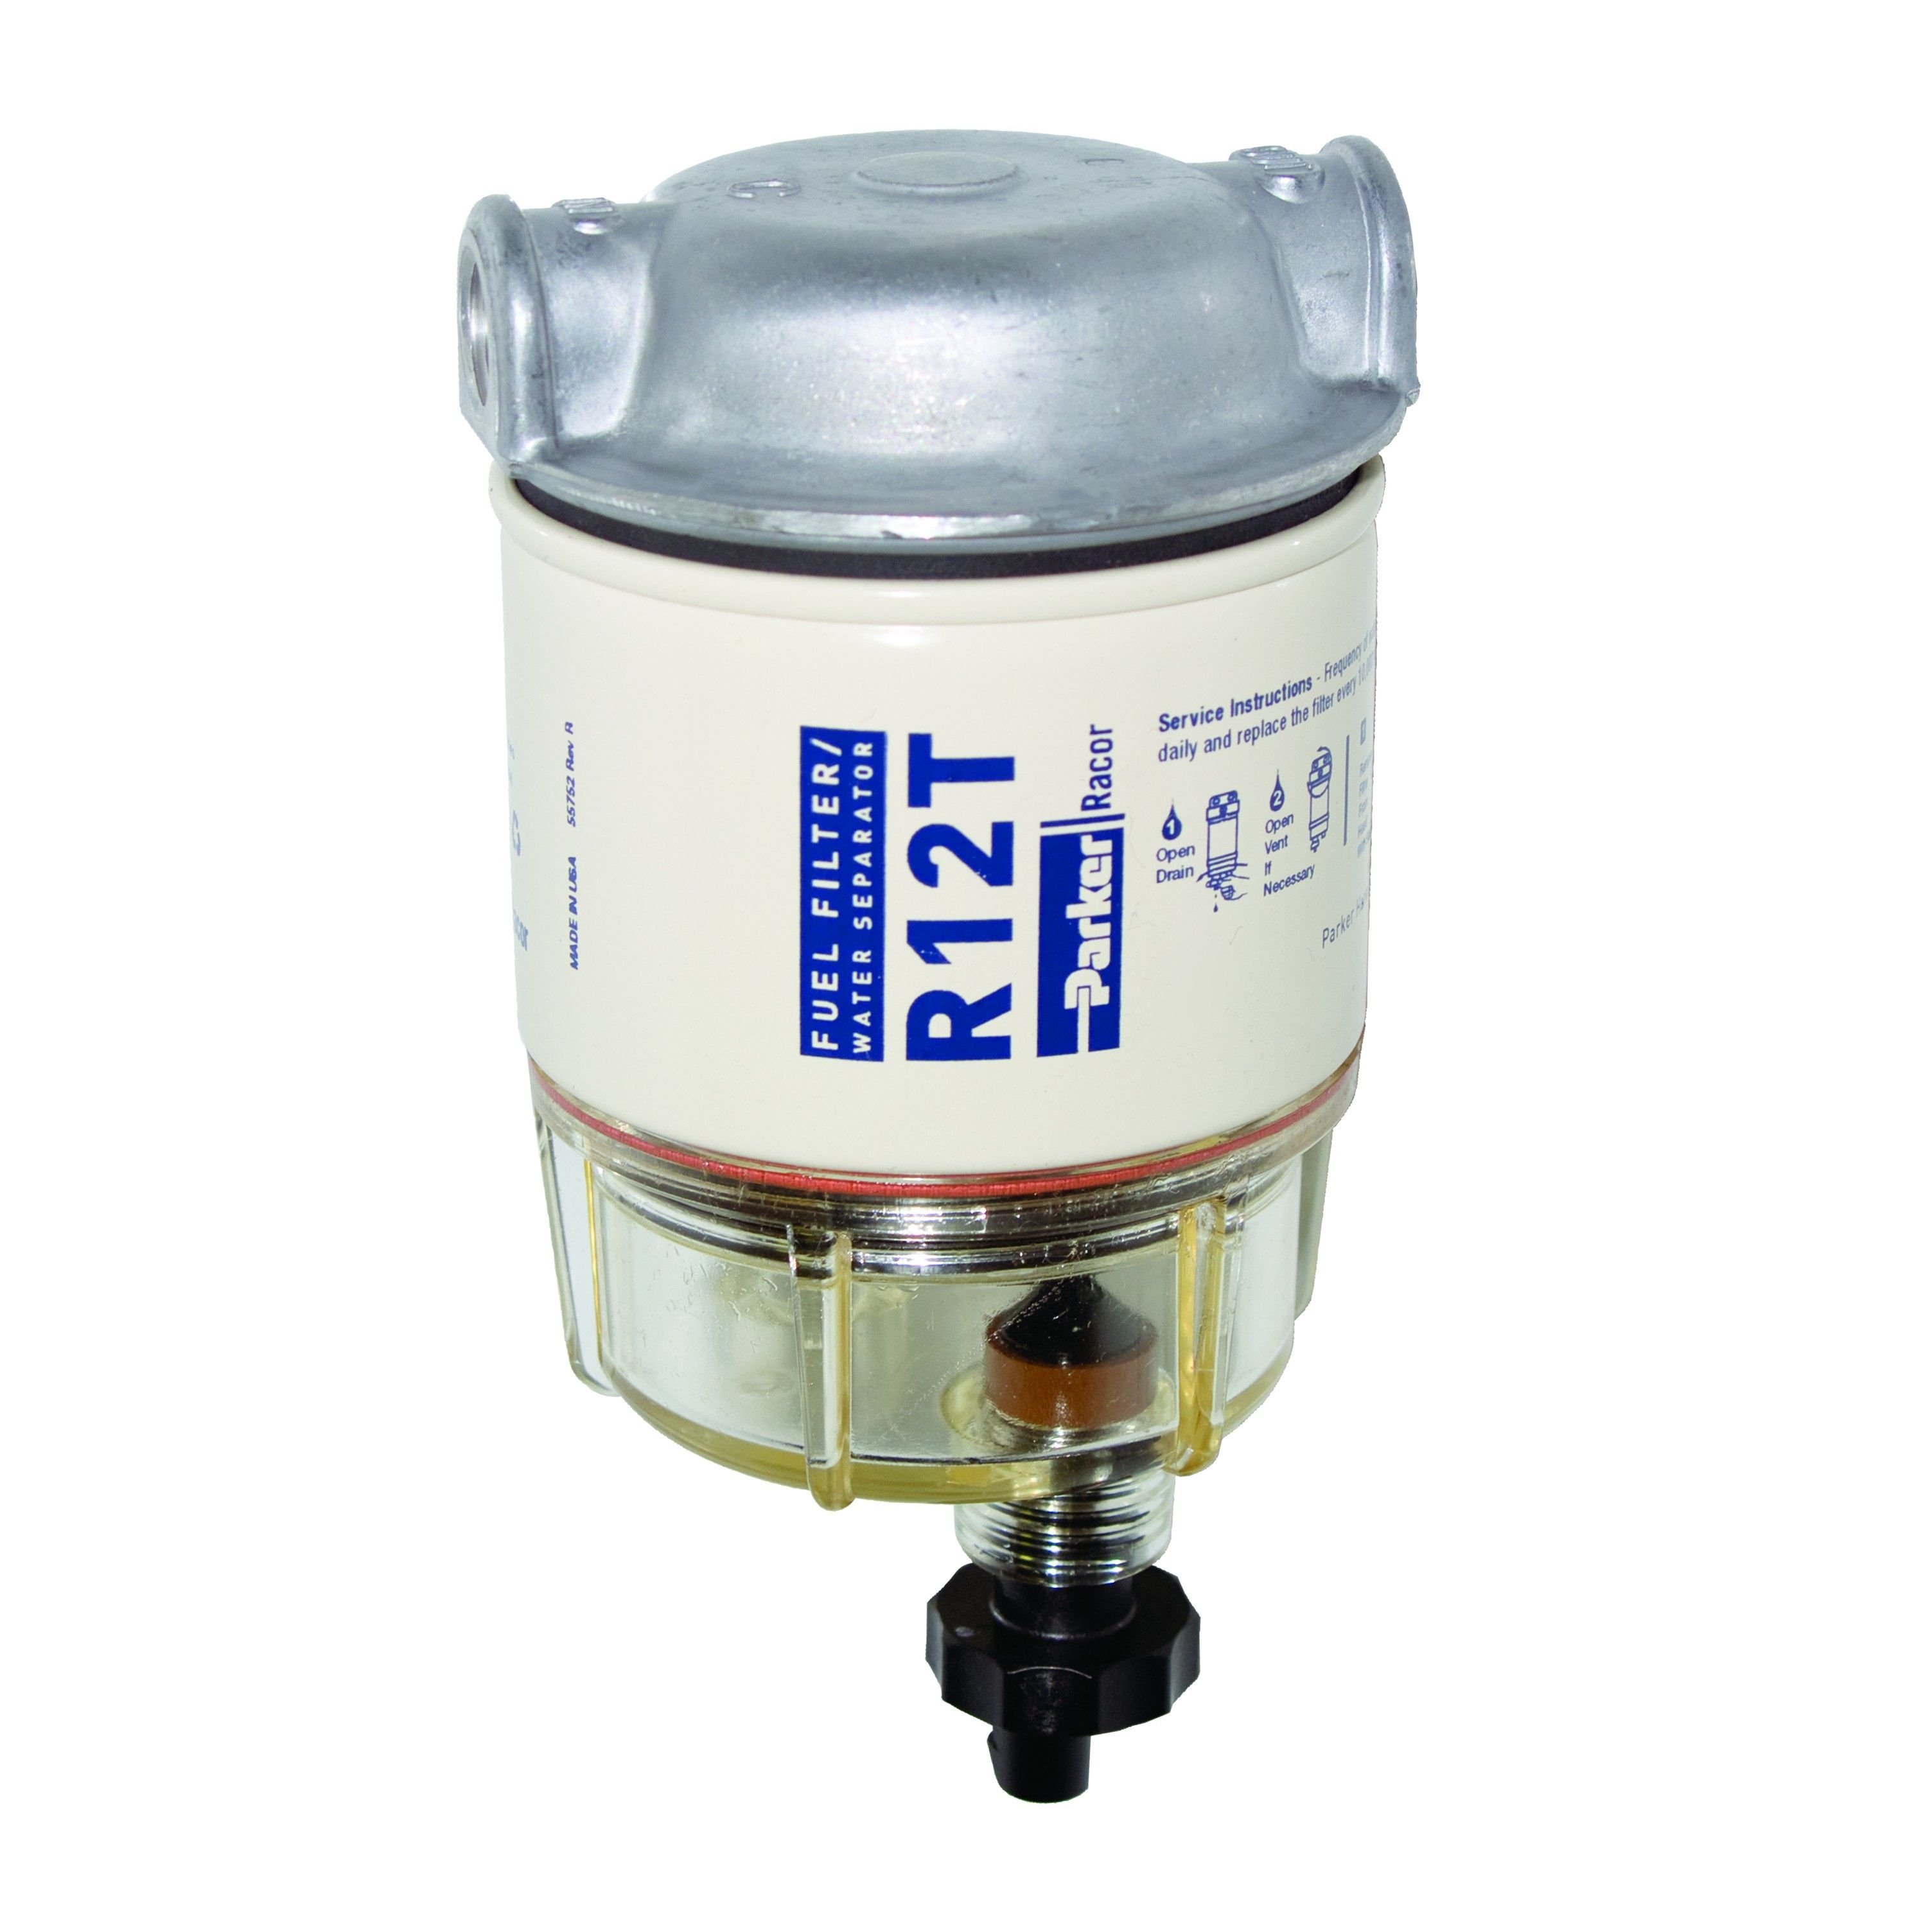 Racor R12P Fuel Water Separator Filter Spin On Series 30 Micron 120A 140R Series